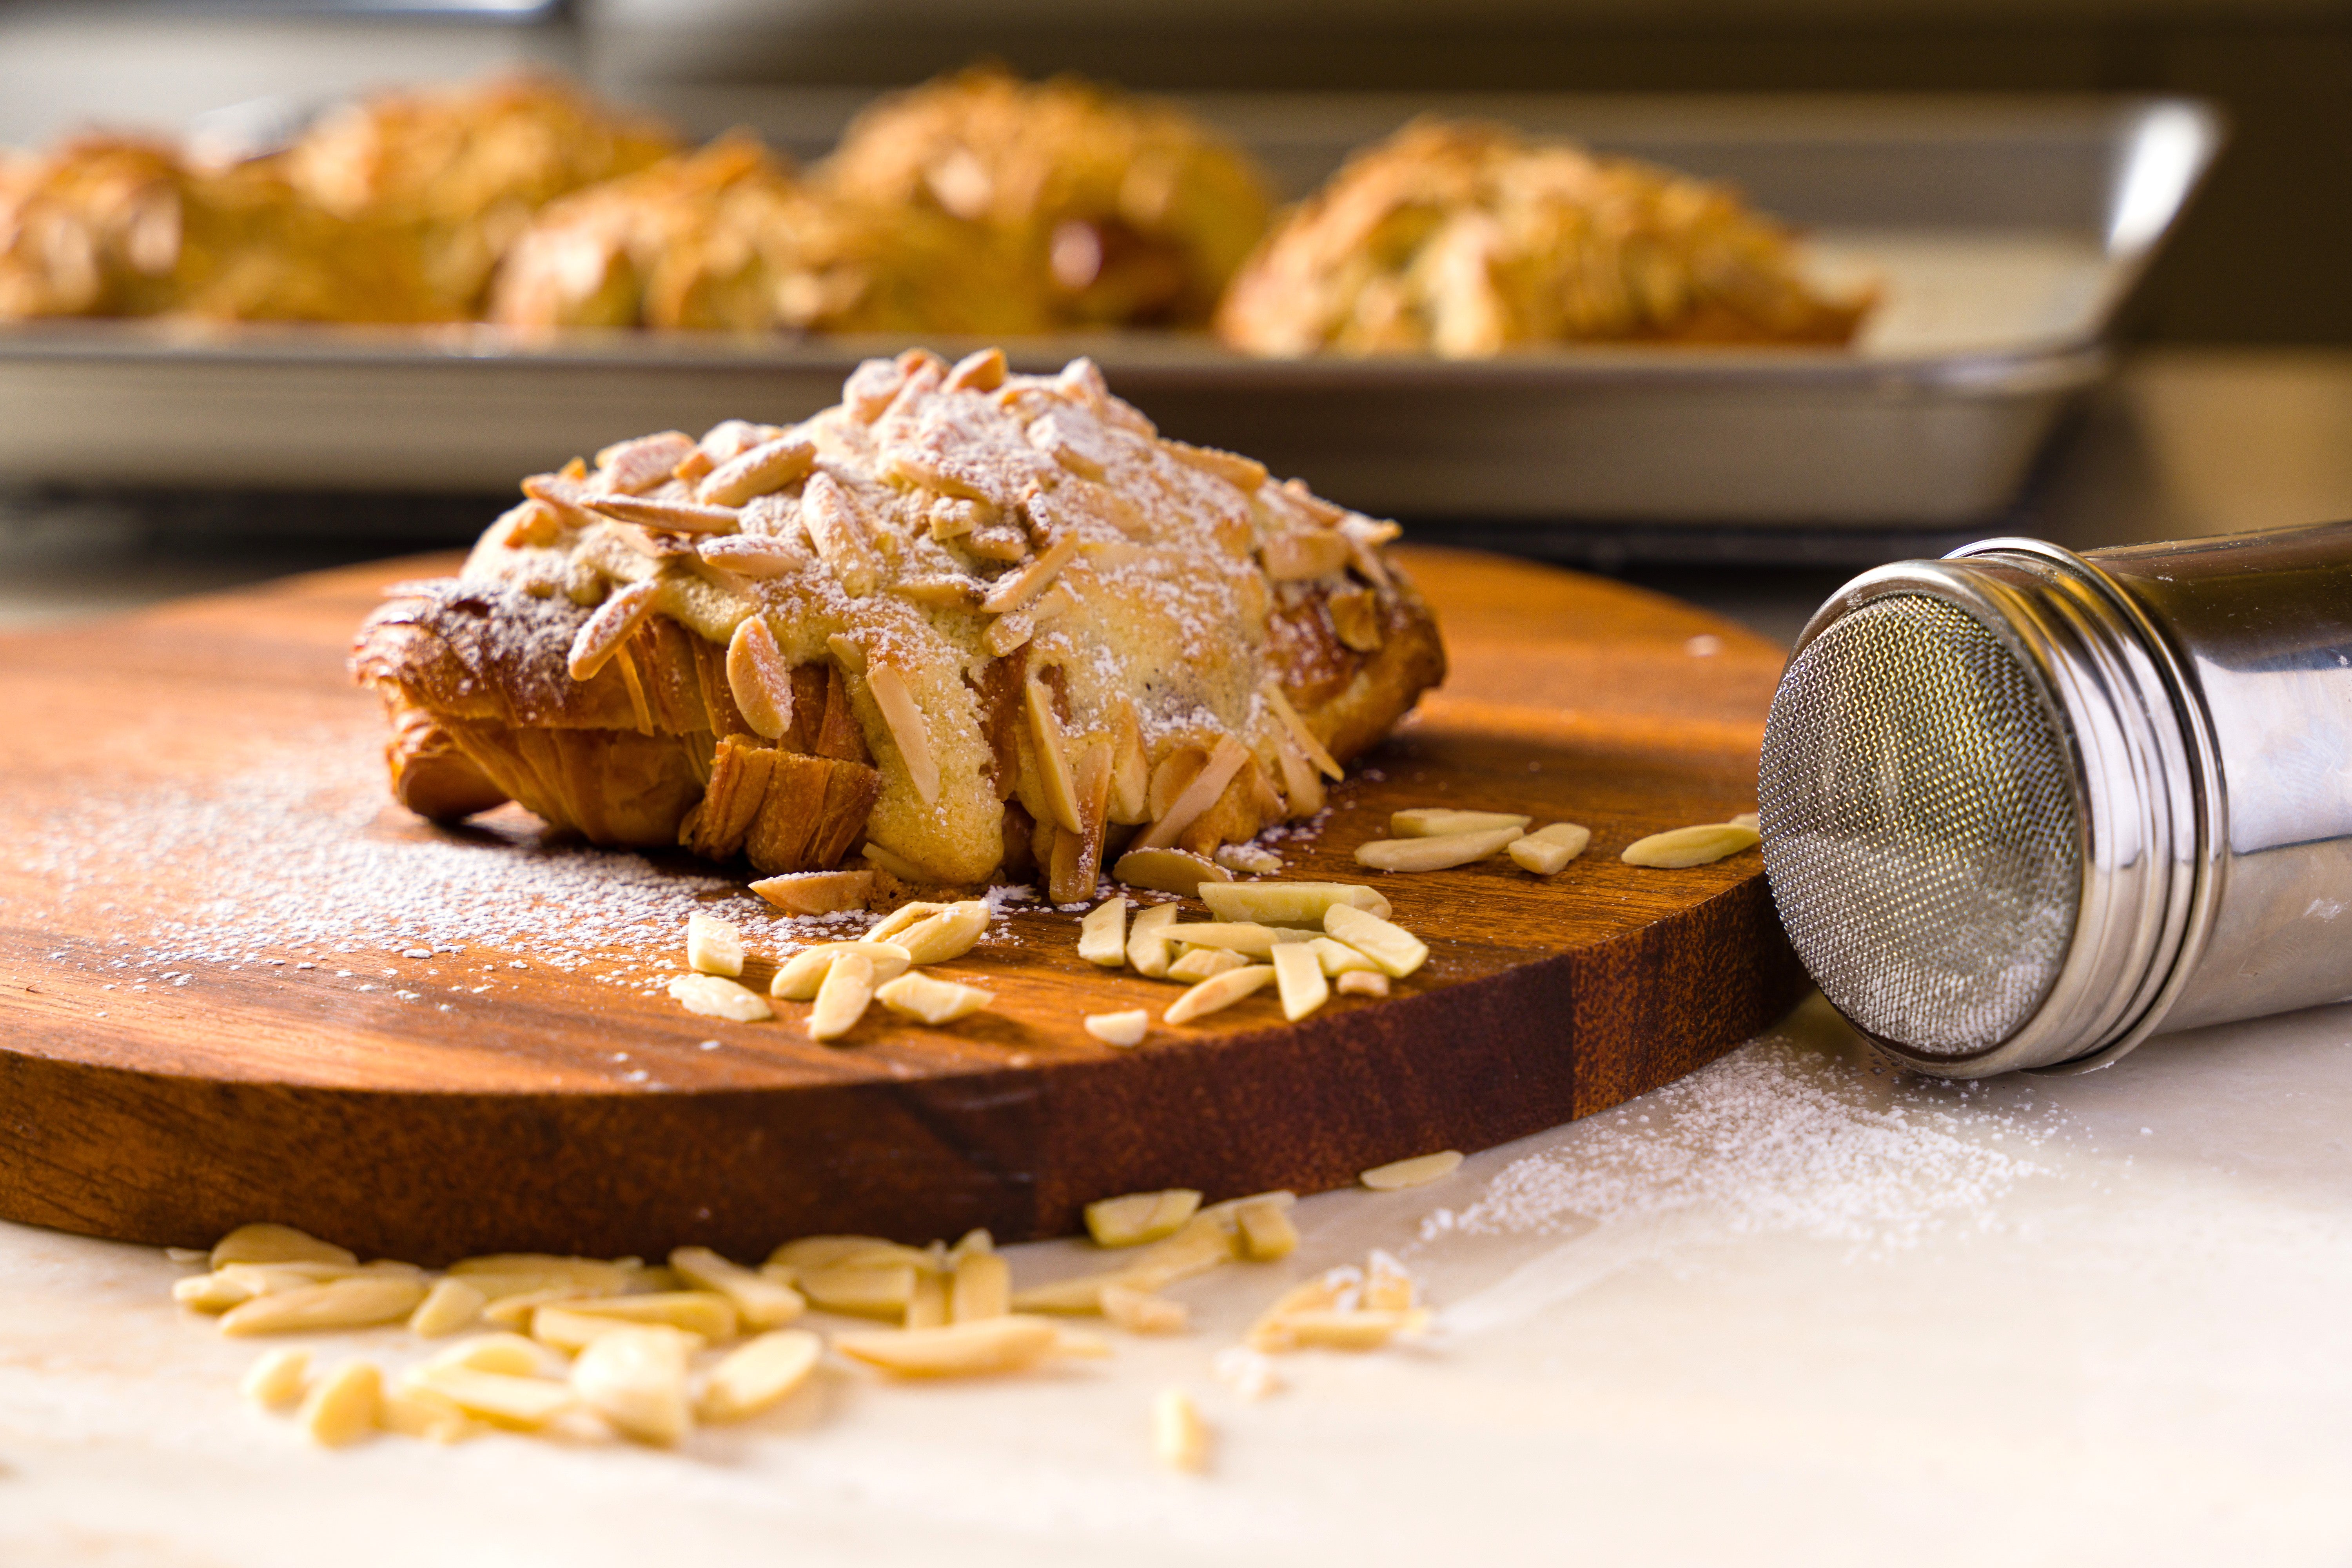 Almond croissant dusted in sugar sits on a round wooden cutting board with a tray of croissants in the background